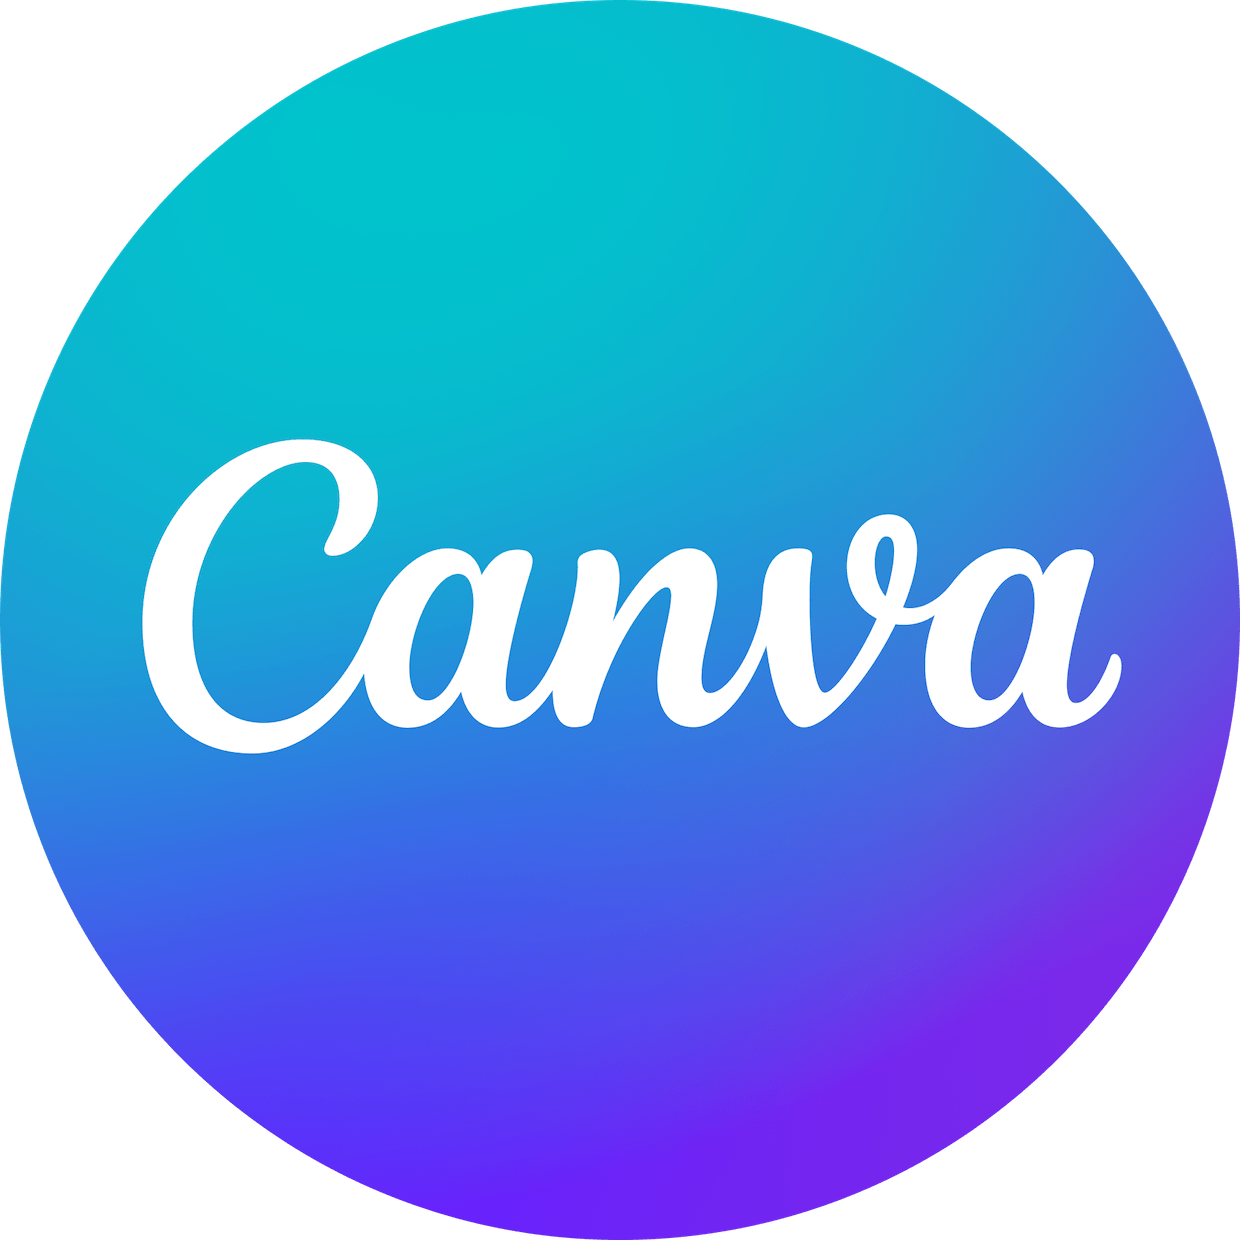 <span  class="uc_style_uc_tiles_grid_image_elementor_uc_items_attribute_title" style="color:#ffffff;">Canva logo</span>